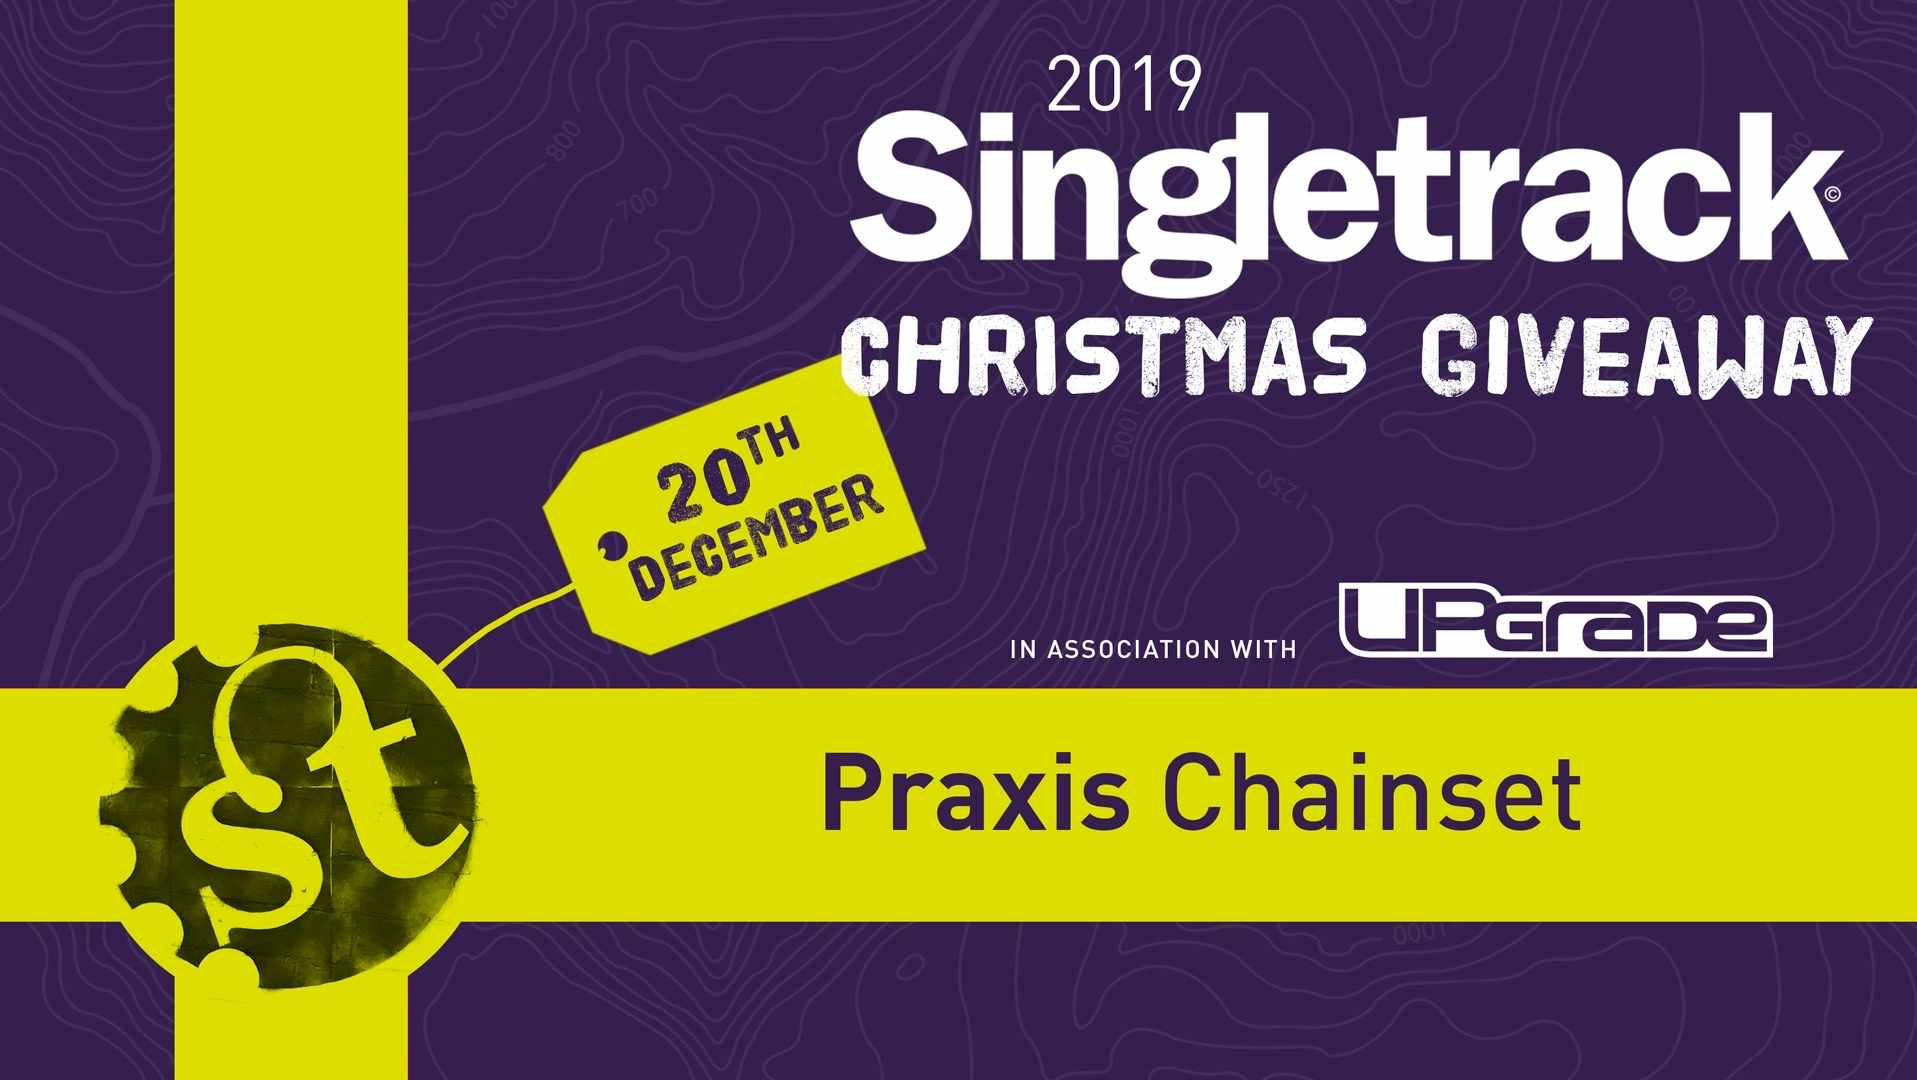 Day 17 of the Singletrack Christmas Countdown could bag you a Praxis Works Cadet chainset, BB and tool!